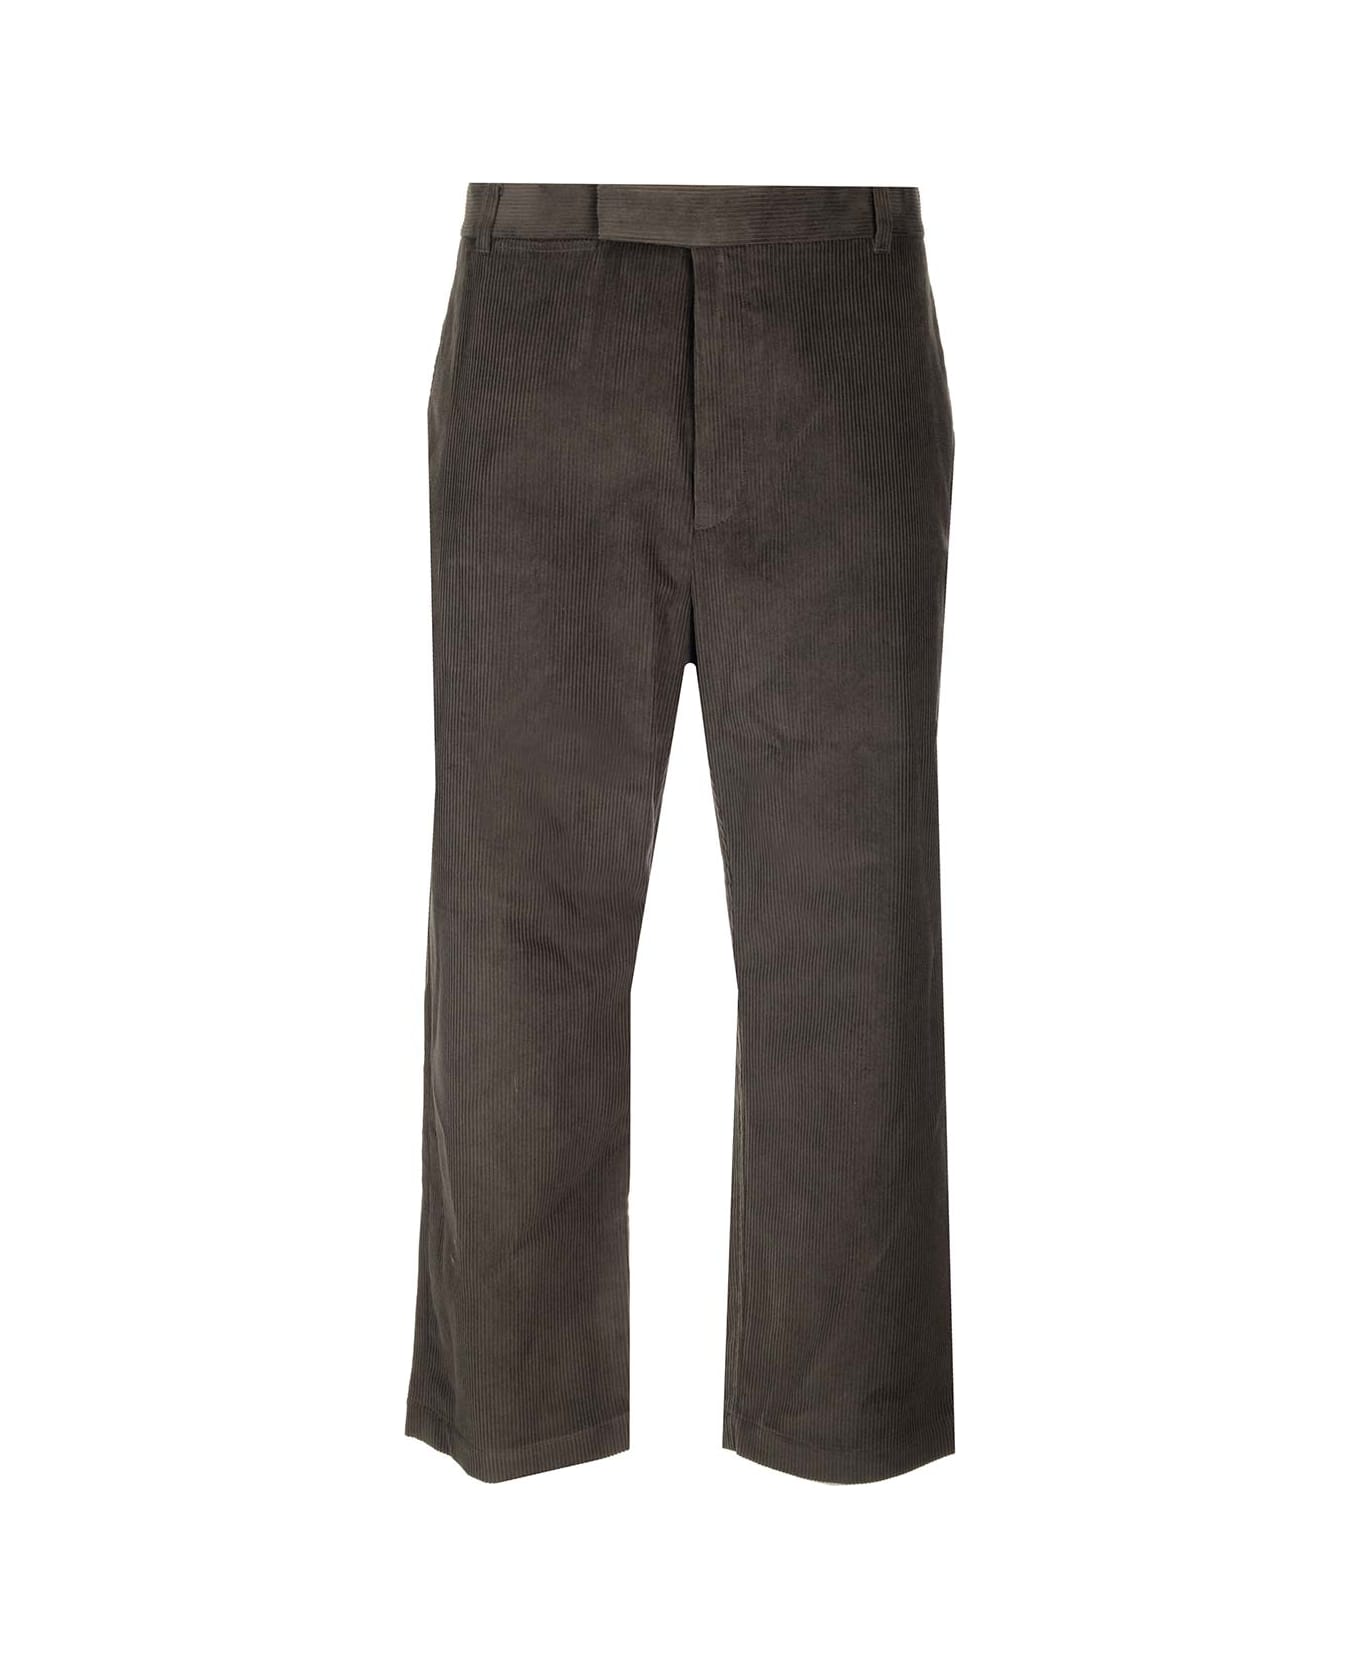 Thom Browne Corduroy Cropped Trousers - BROWN  